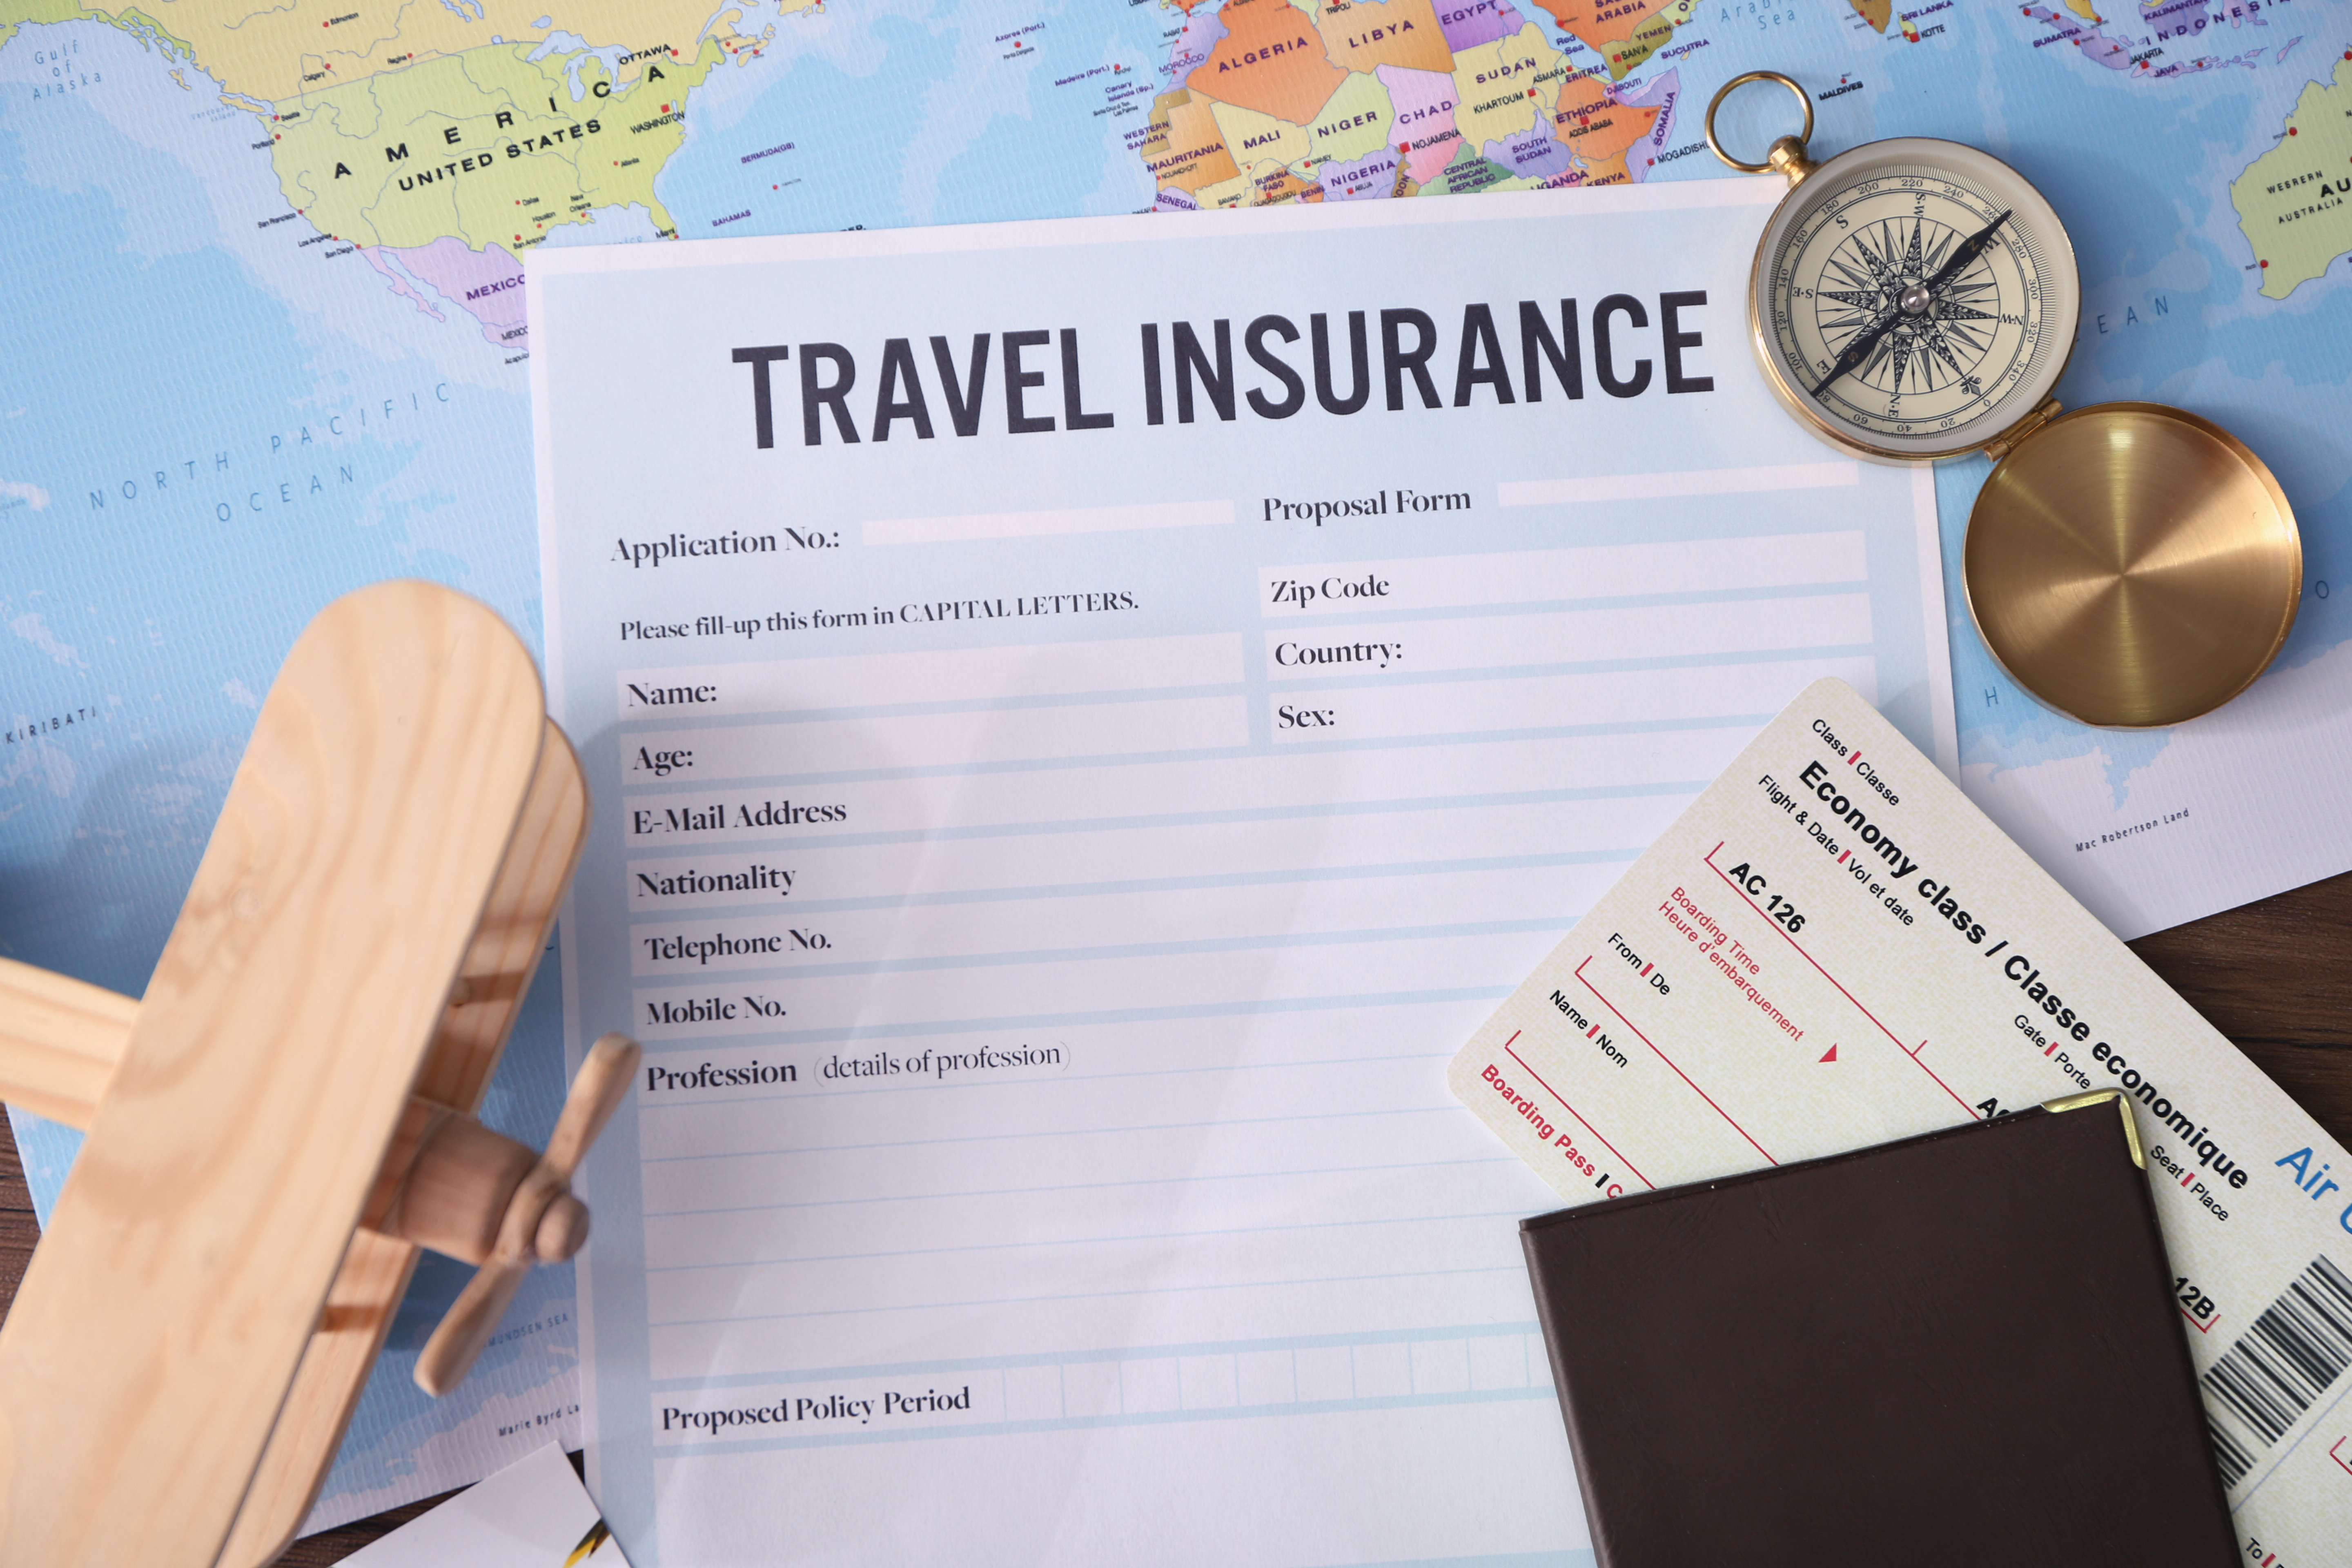 Top Travel Insurance Providers: A Comparison of Features and Benefits